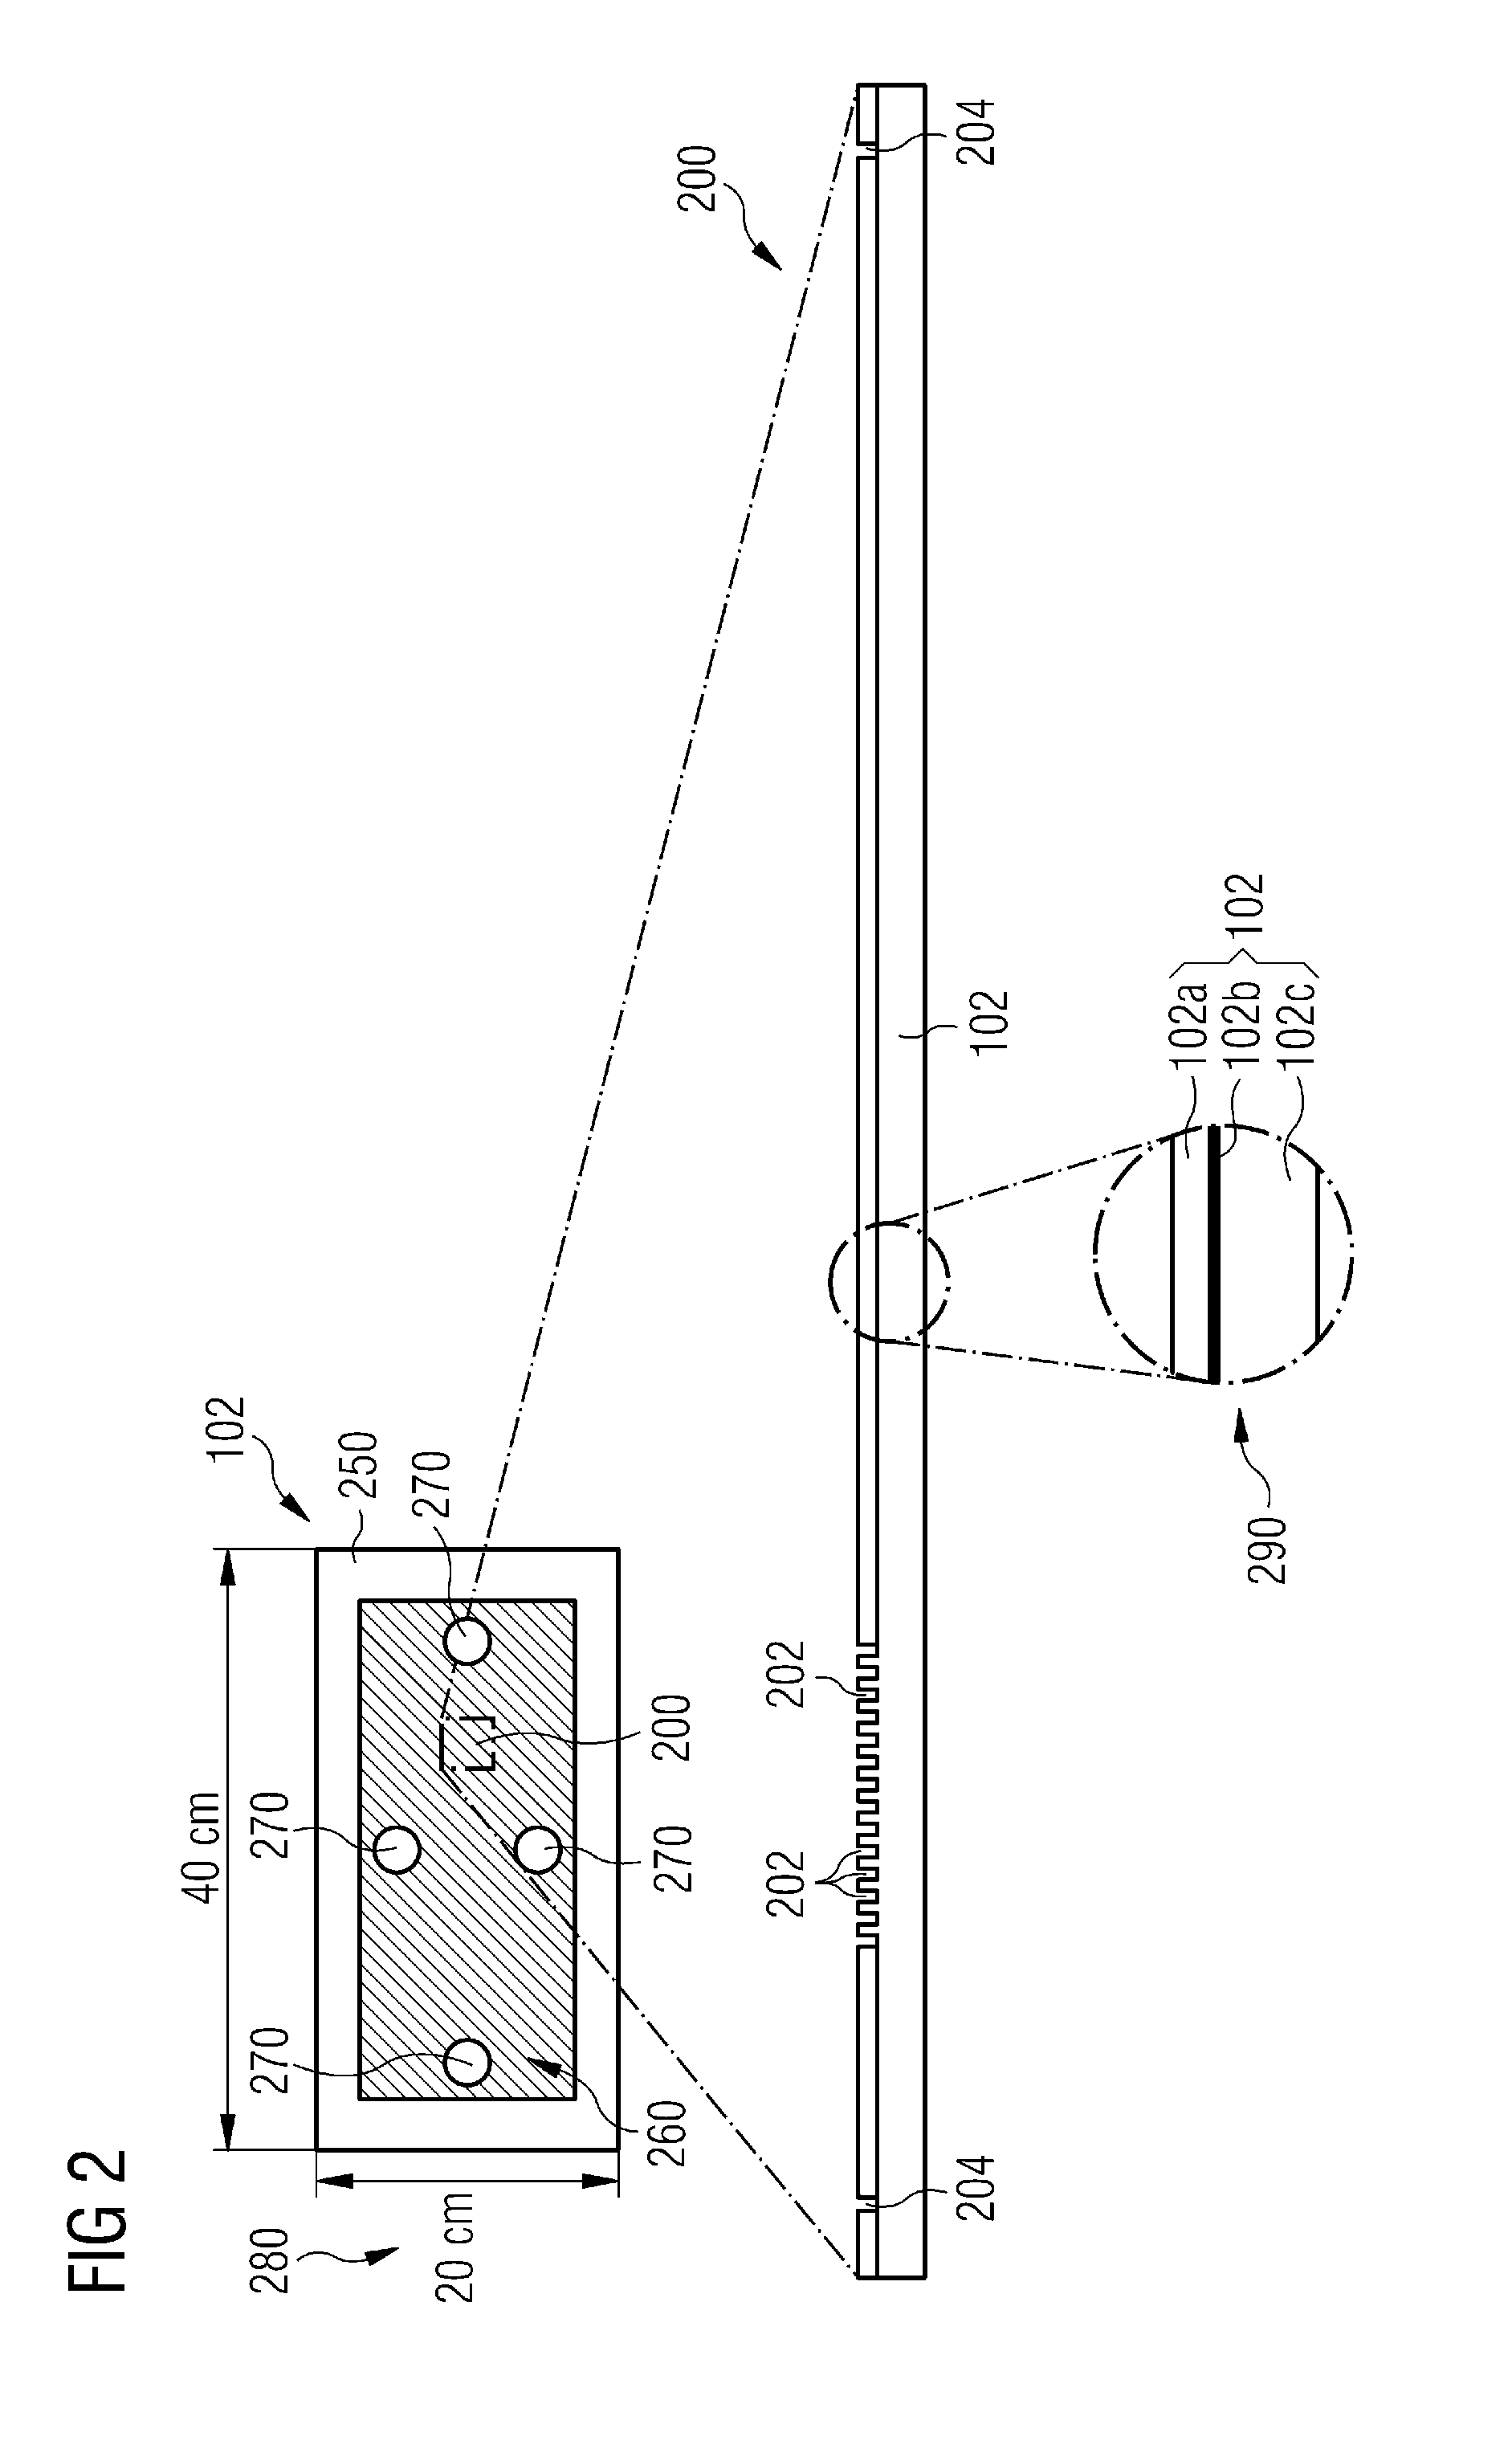 Chip assembling on adhesion layer or dielectric layer, extending beyond chip, on substrate